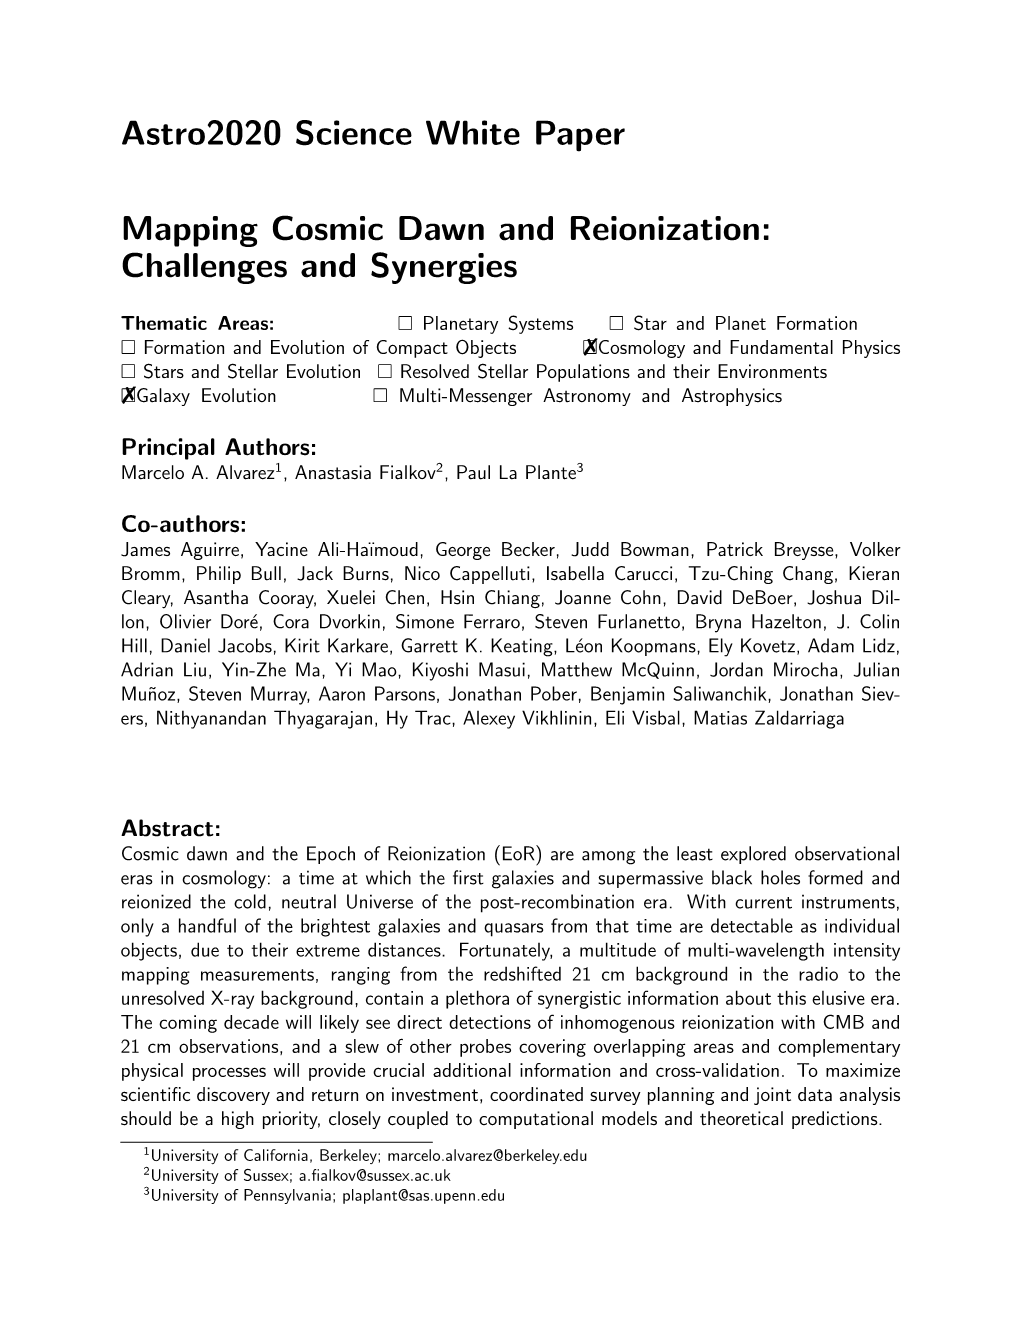 Astro2020 Science White Paper Mapping Cosmic